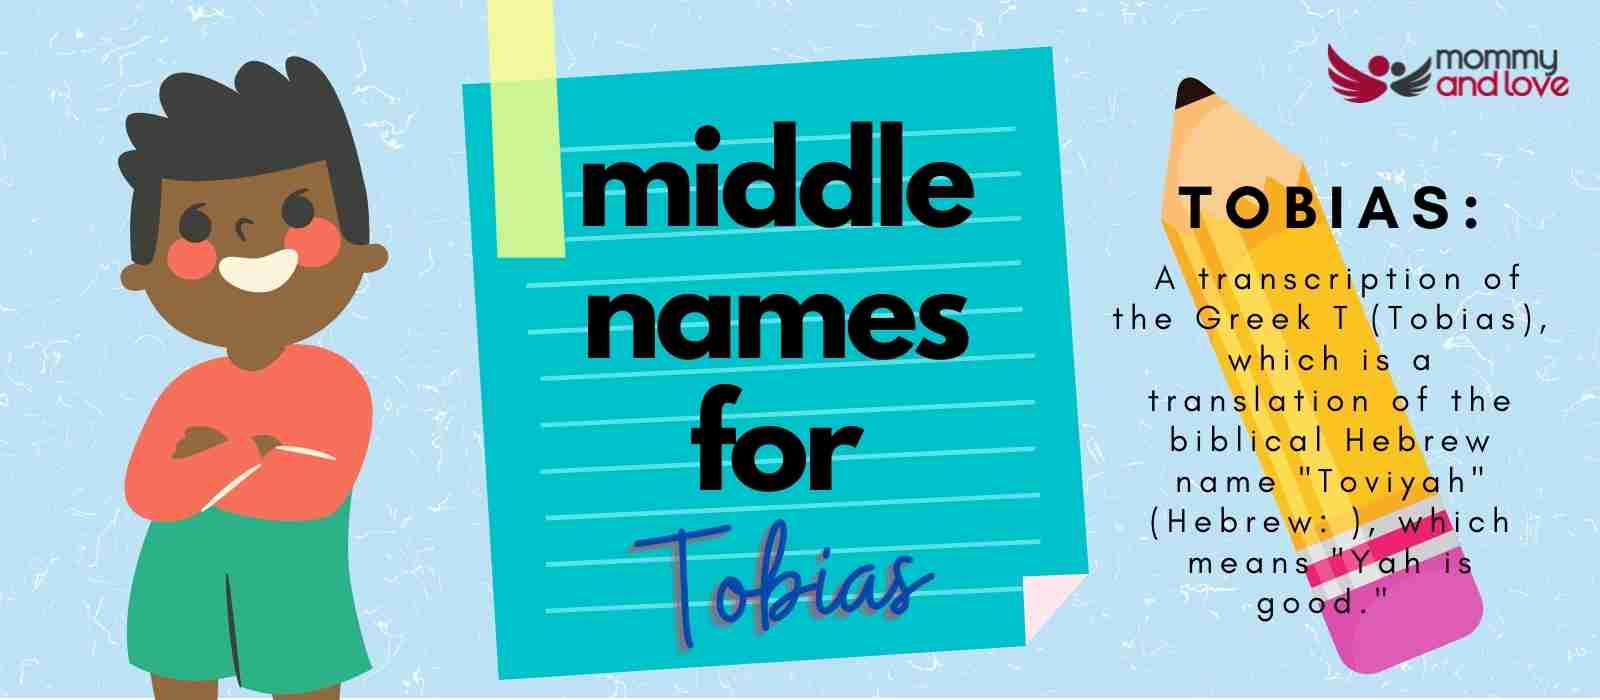 Middle Names for Tobias